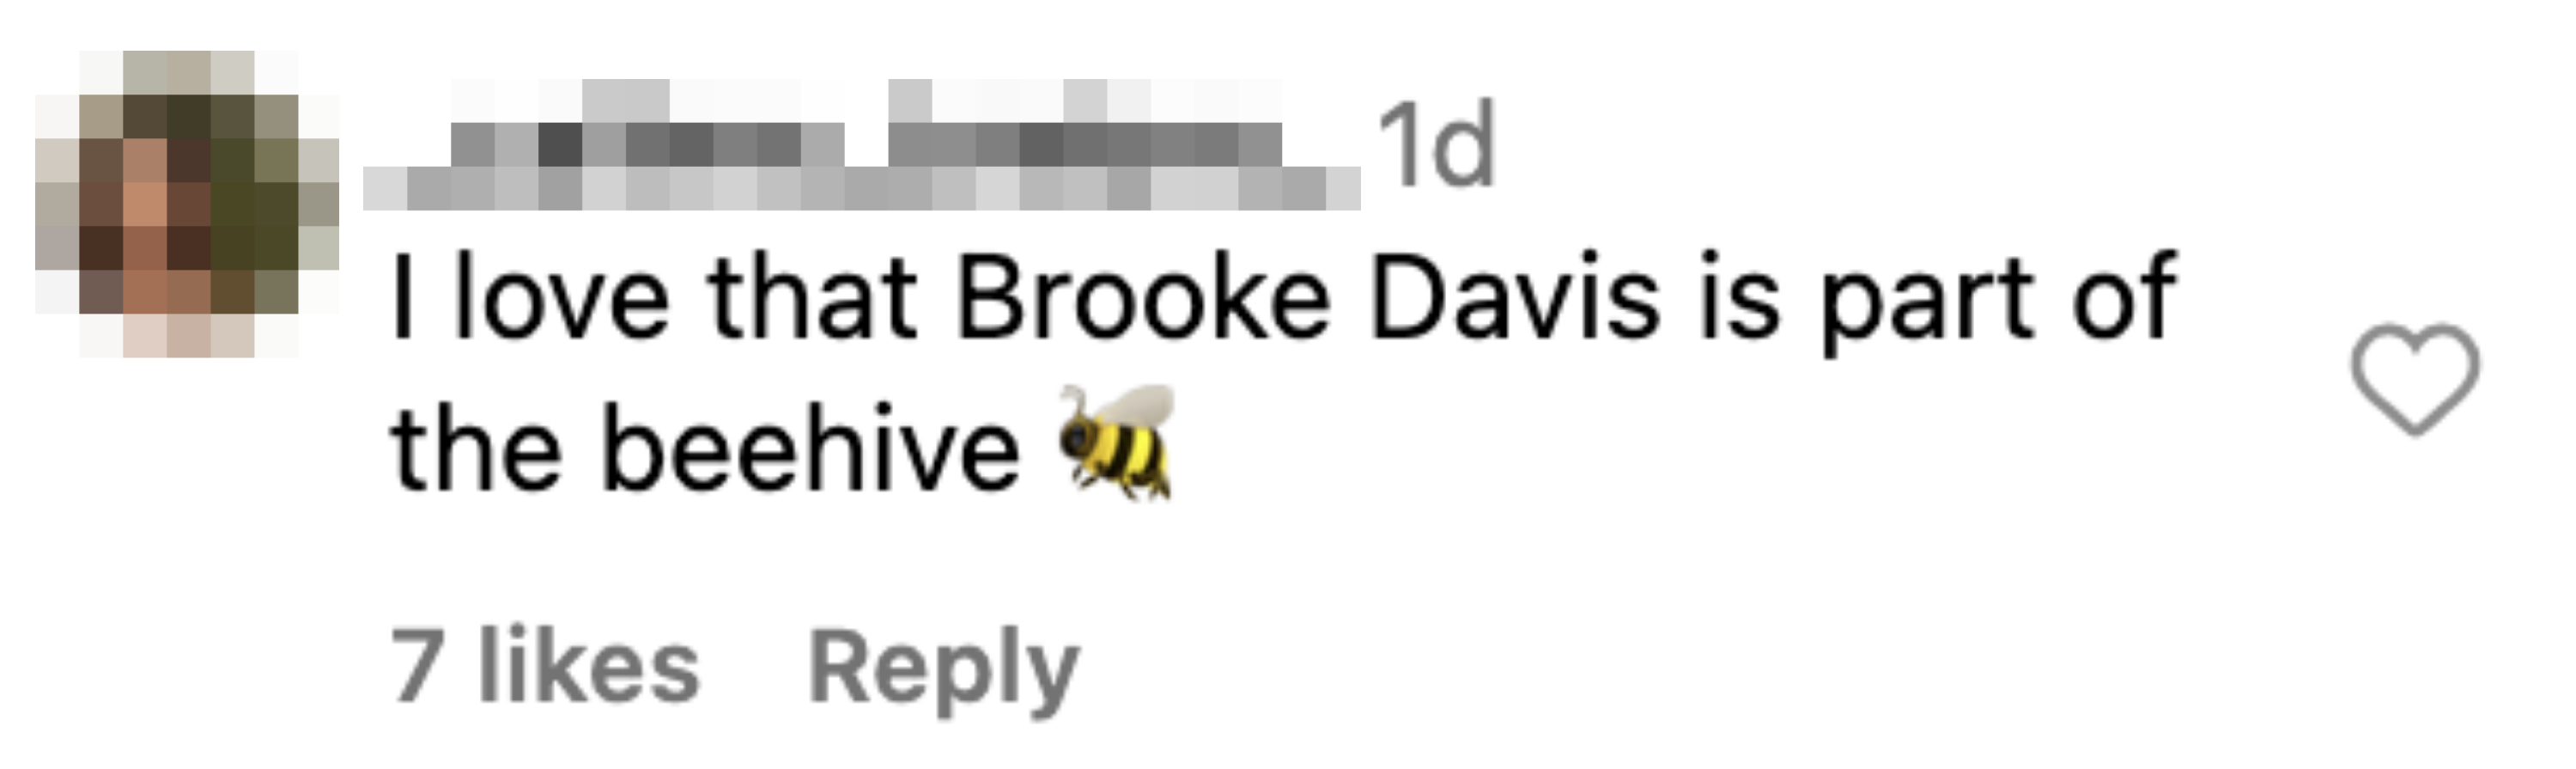 &quot;I love that Brooke Davis is part of the beehive&quot;